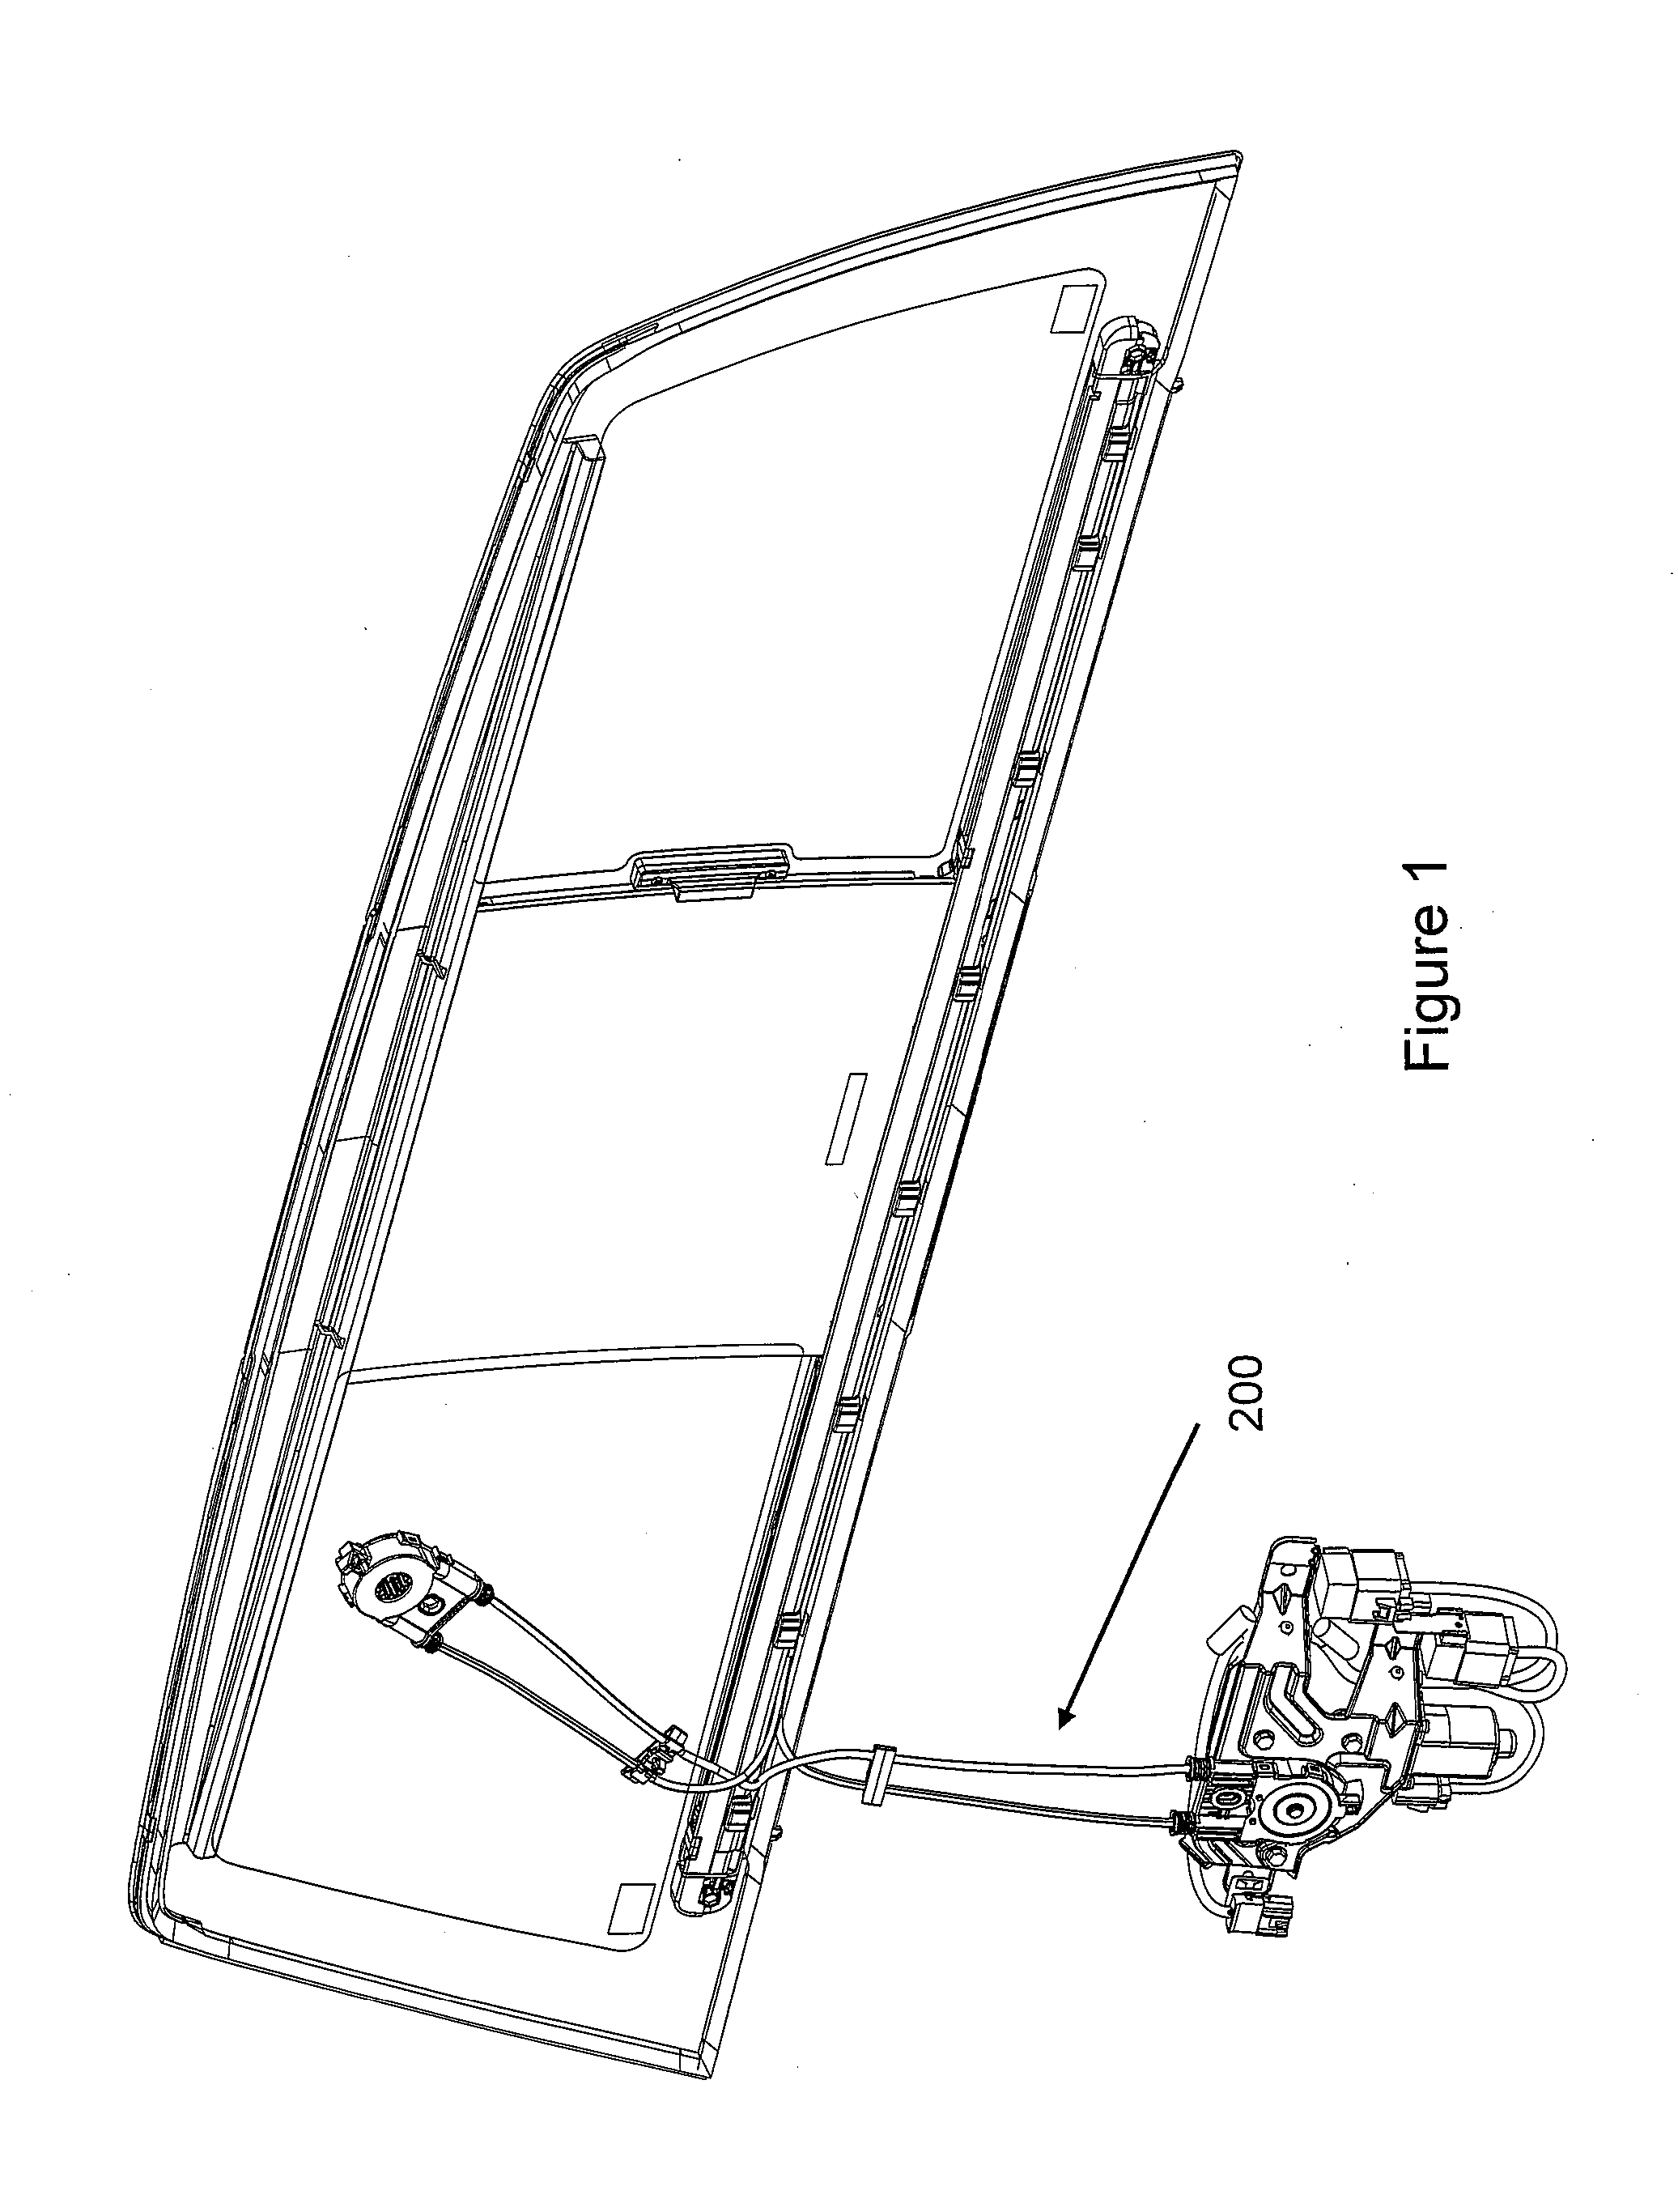 Backlite assembly for a vehicle